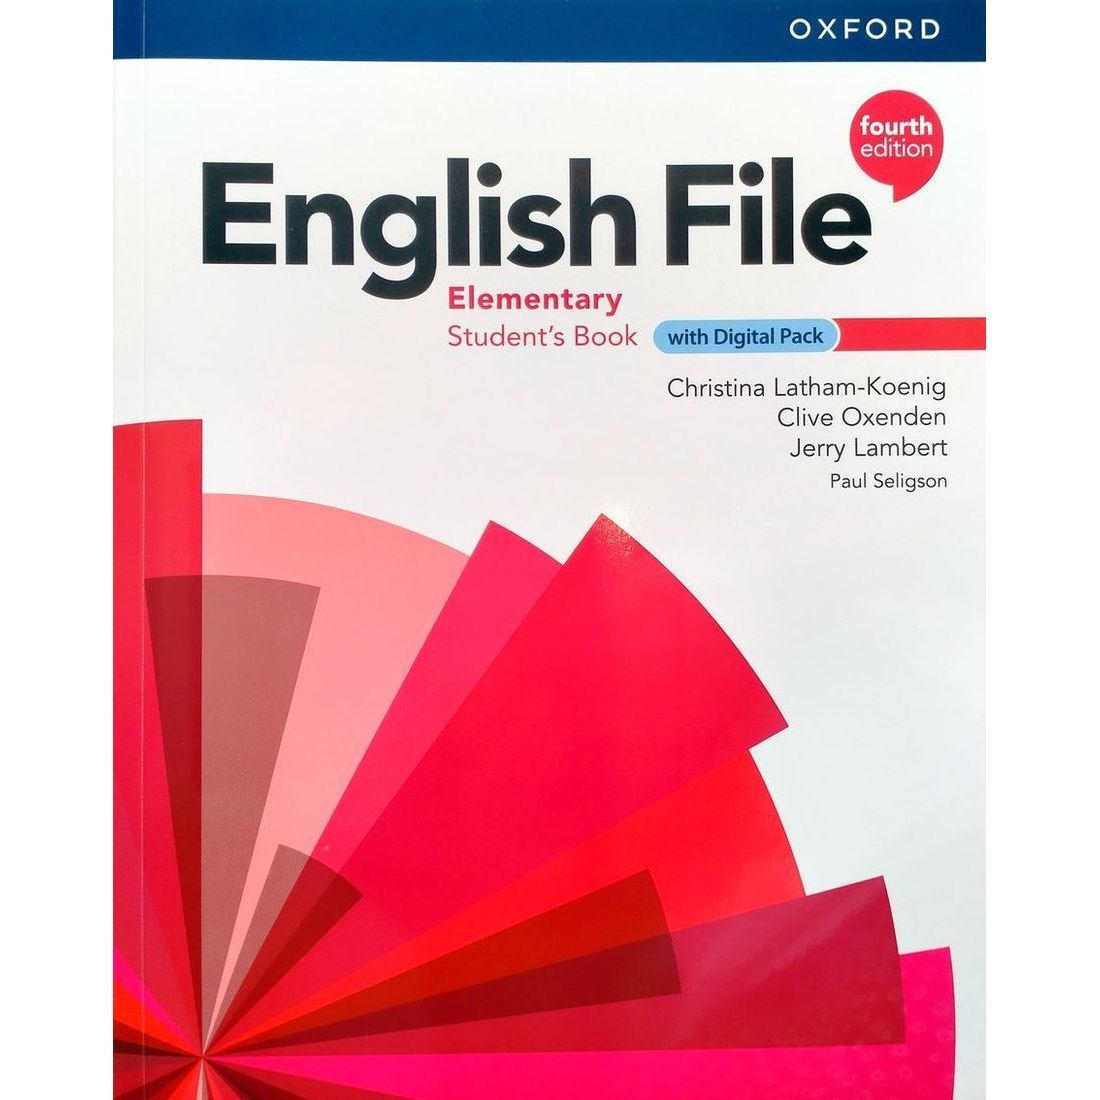 Elementary 4 edition. New English file (Oxford) Intermediate student's book: Clive Oxenden, Christina Latham-Koenig.. English file Elementary 4th Edition. English file Intermediate 4th Edition. English file Upper Intermediate 4th Edition.